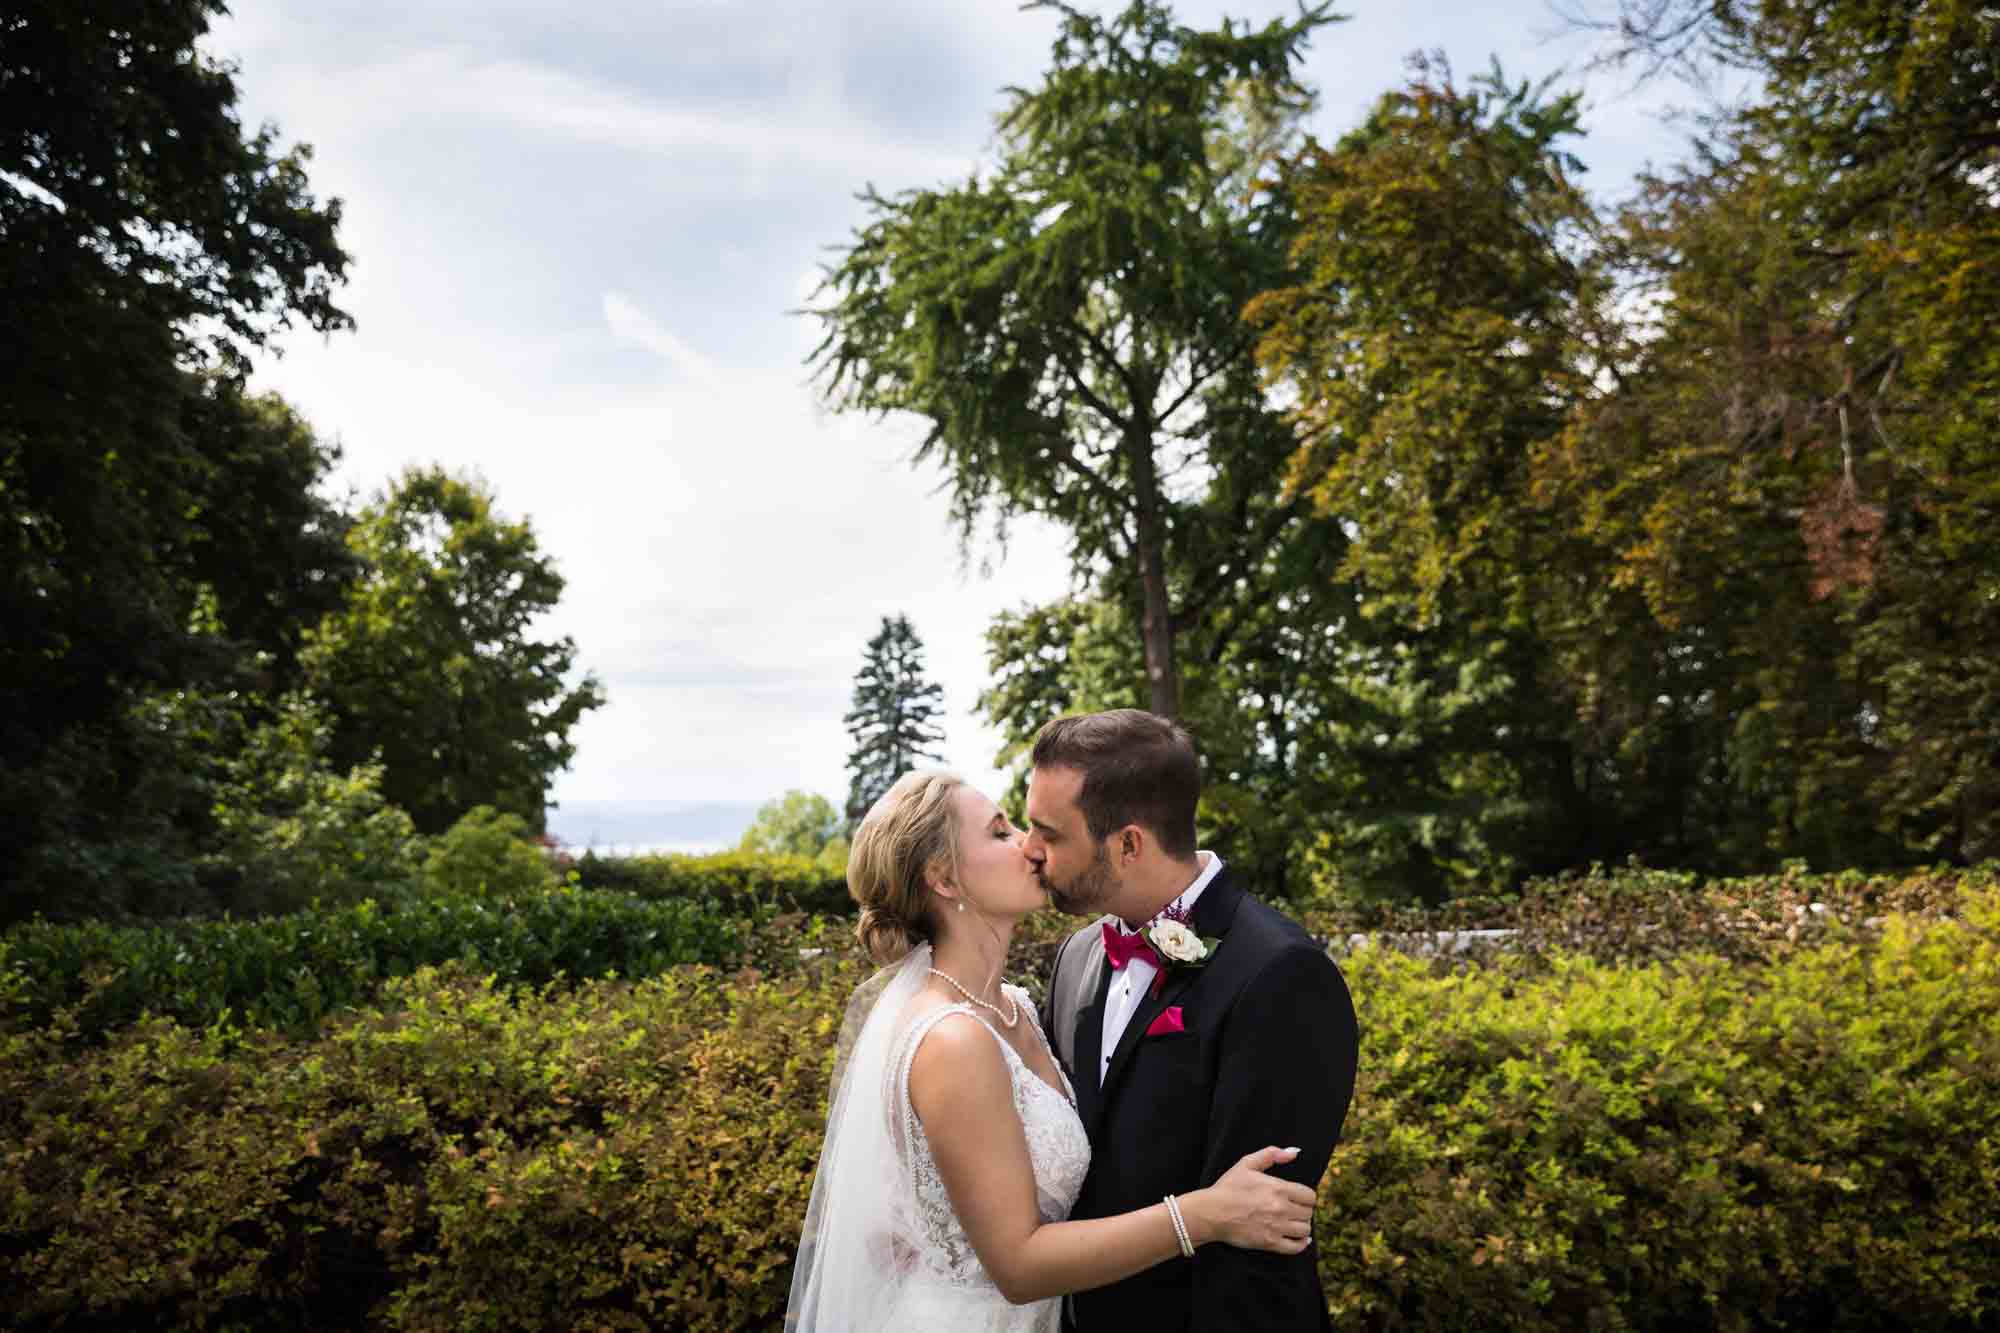 Bride and groom kissing in front of hedge with trees in background